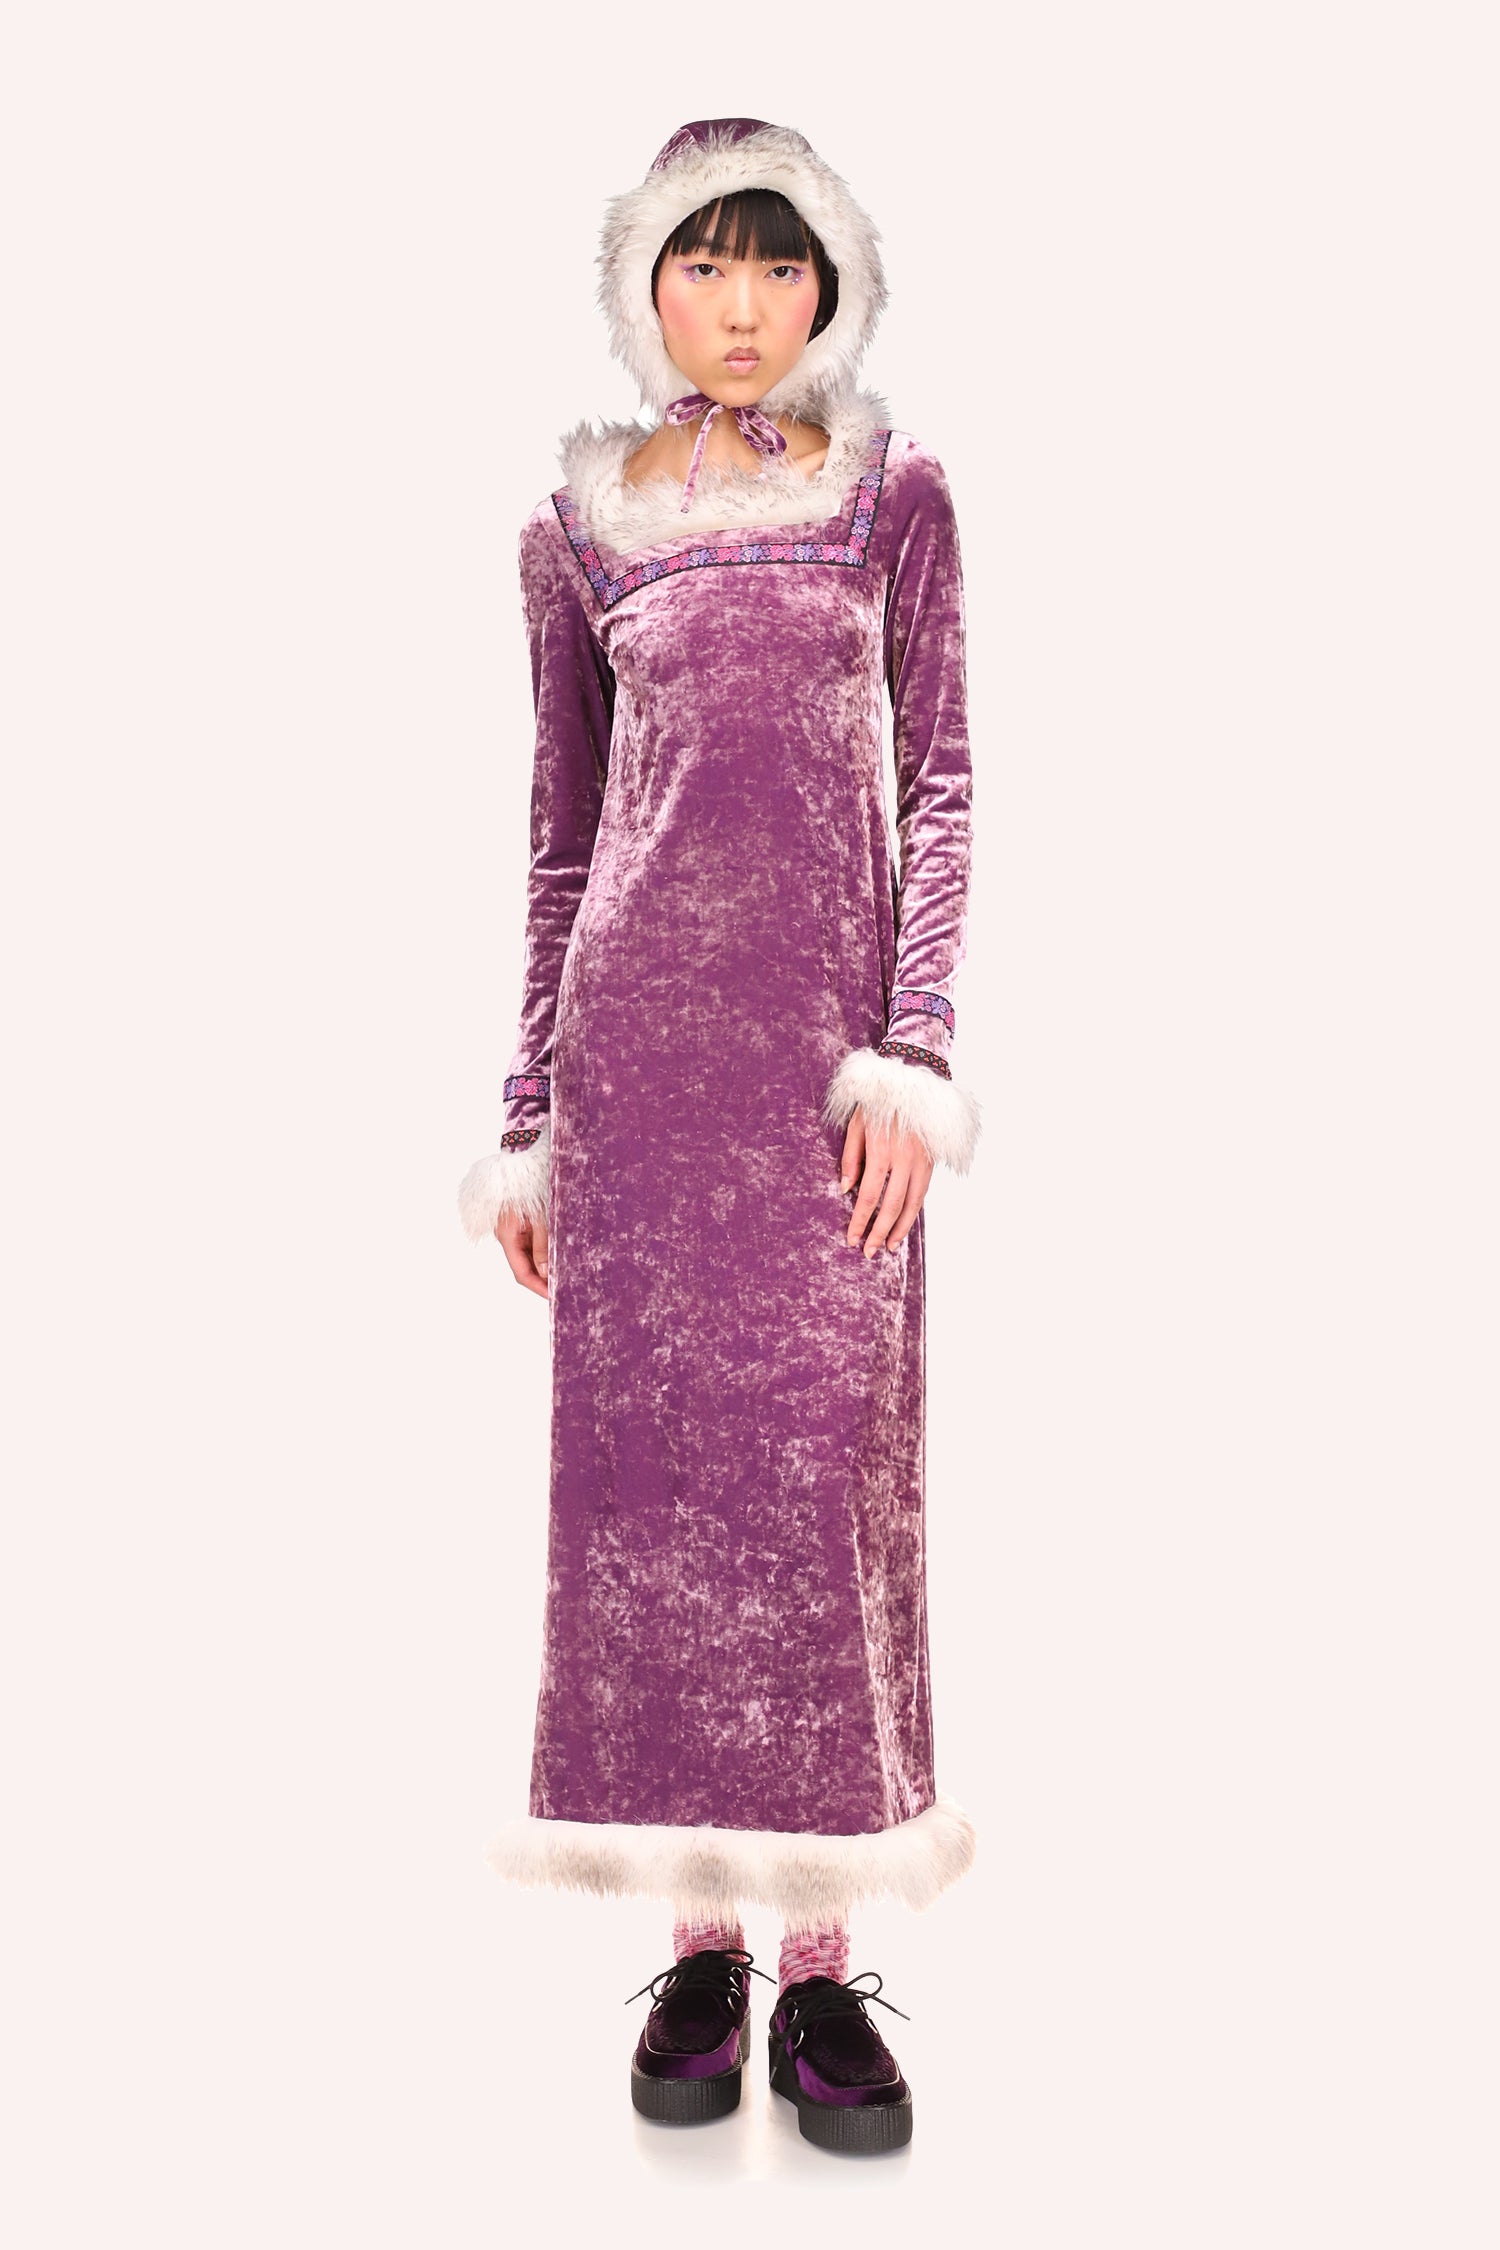 On Princess Audrey Dress Lavender, the white and beige faux fur runs around the collar.